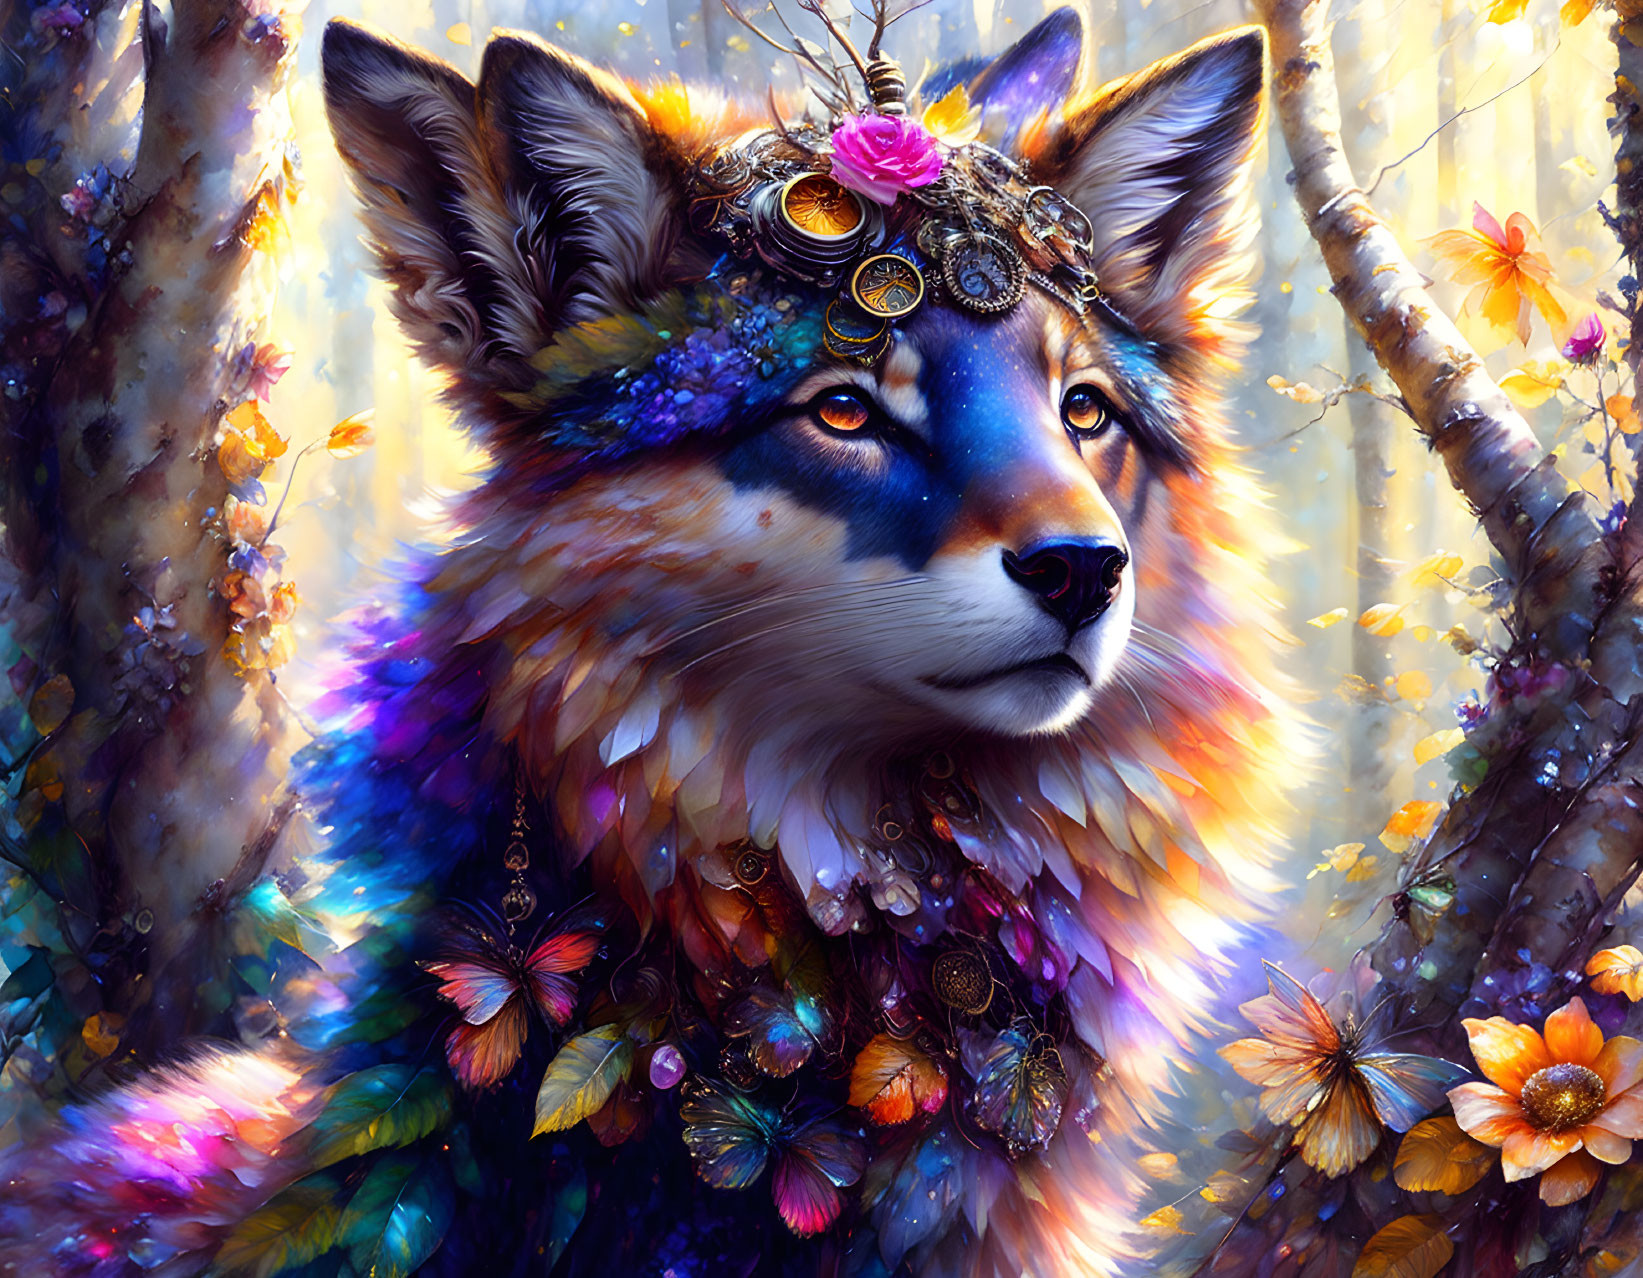 Colorful Fox in Enchanted Forest with Jewelry and Sparkling Light